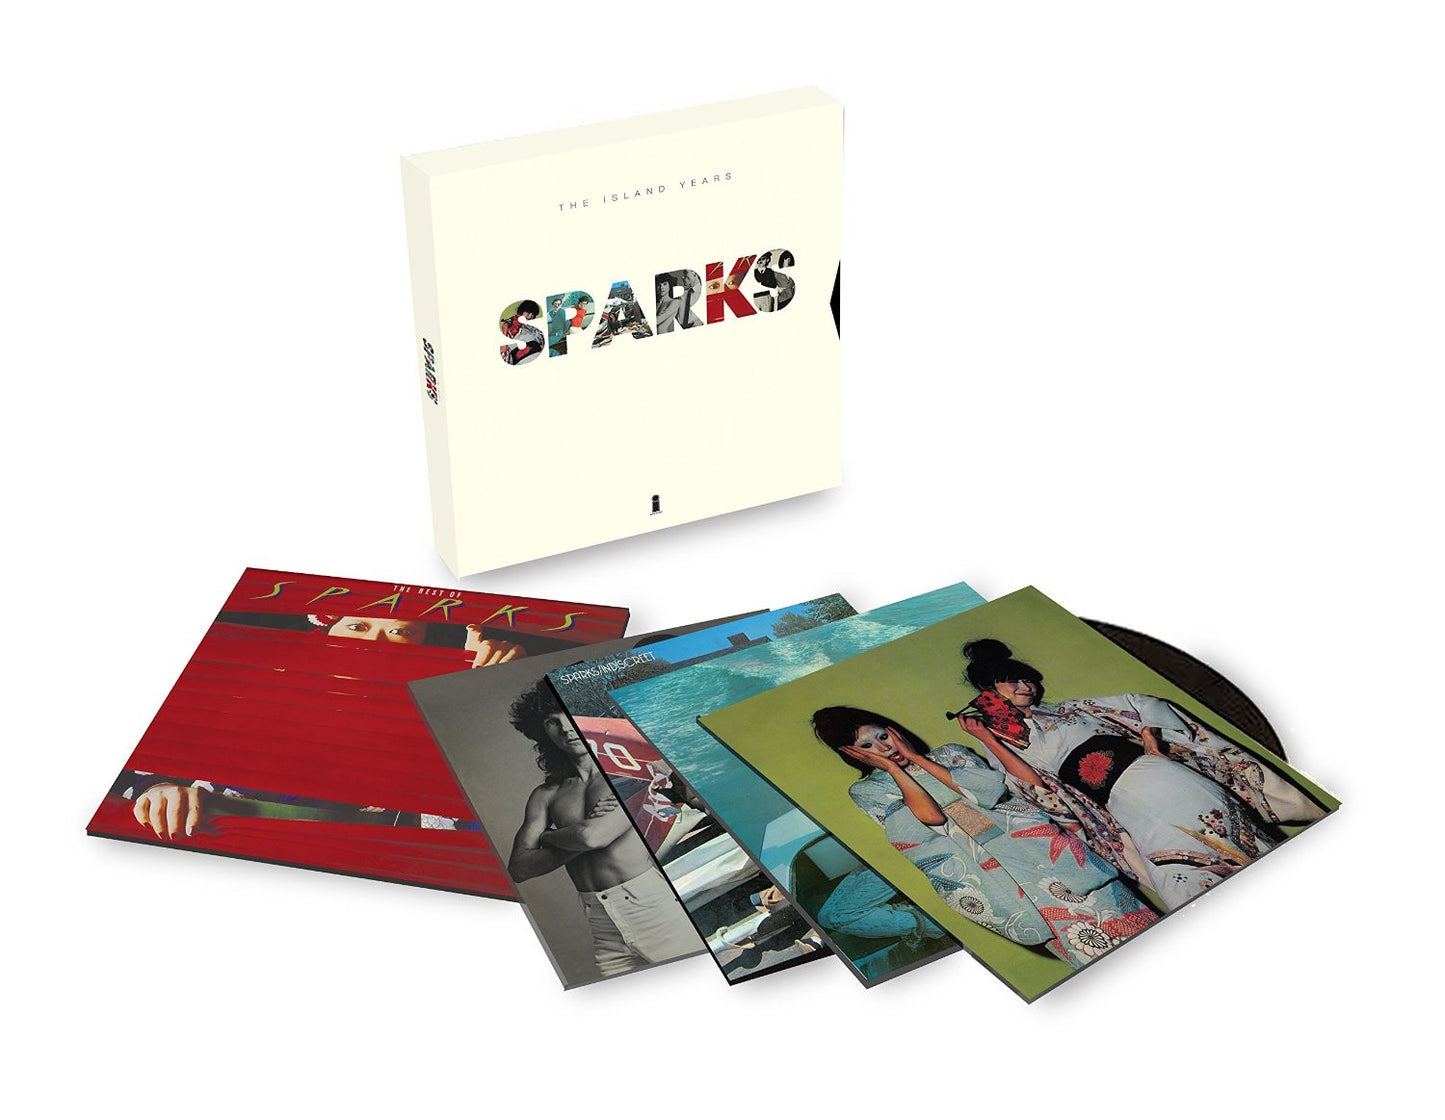 Sparks - Island Years